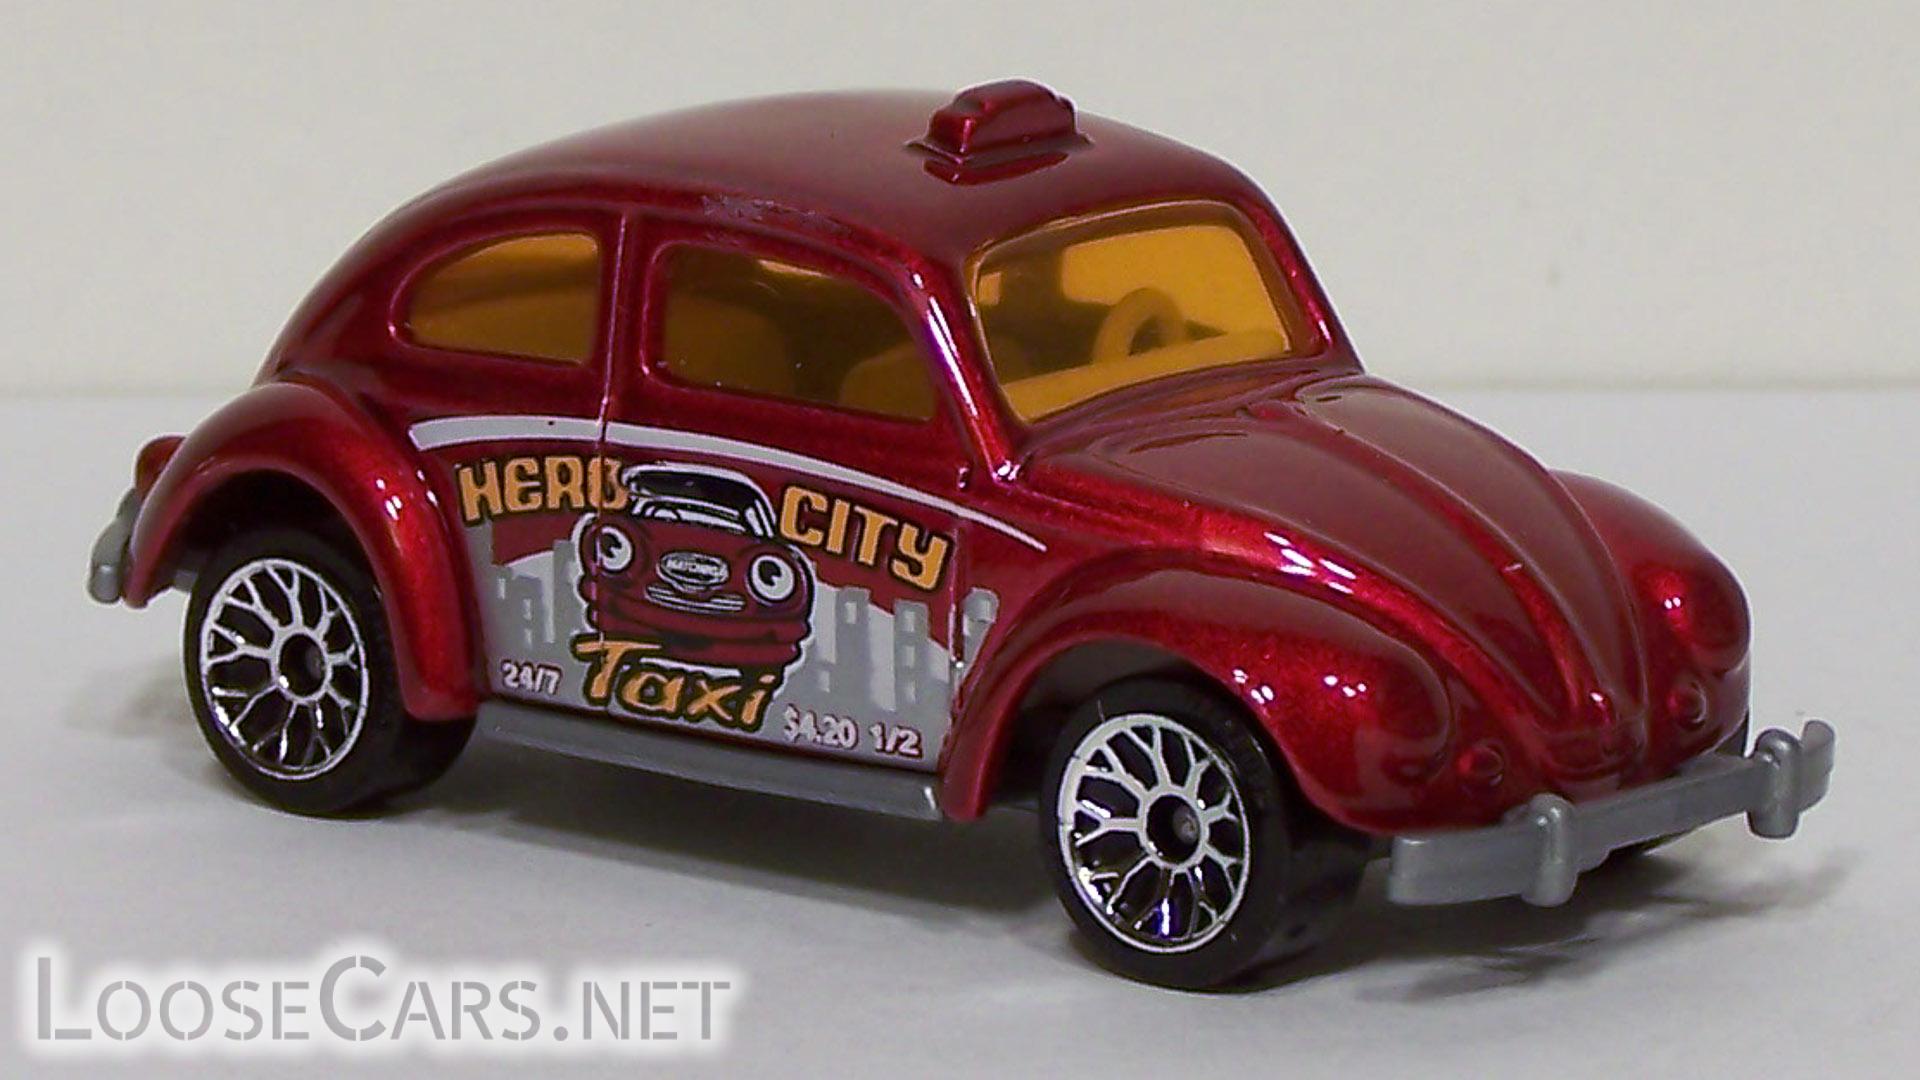 Matchbox Volkswagen Beetle Taxi 2004 Hero City Getting Around - Front Right